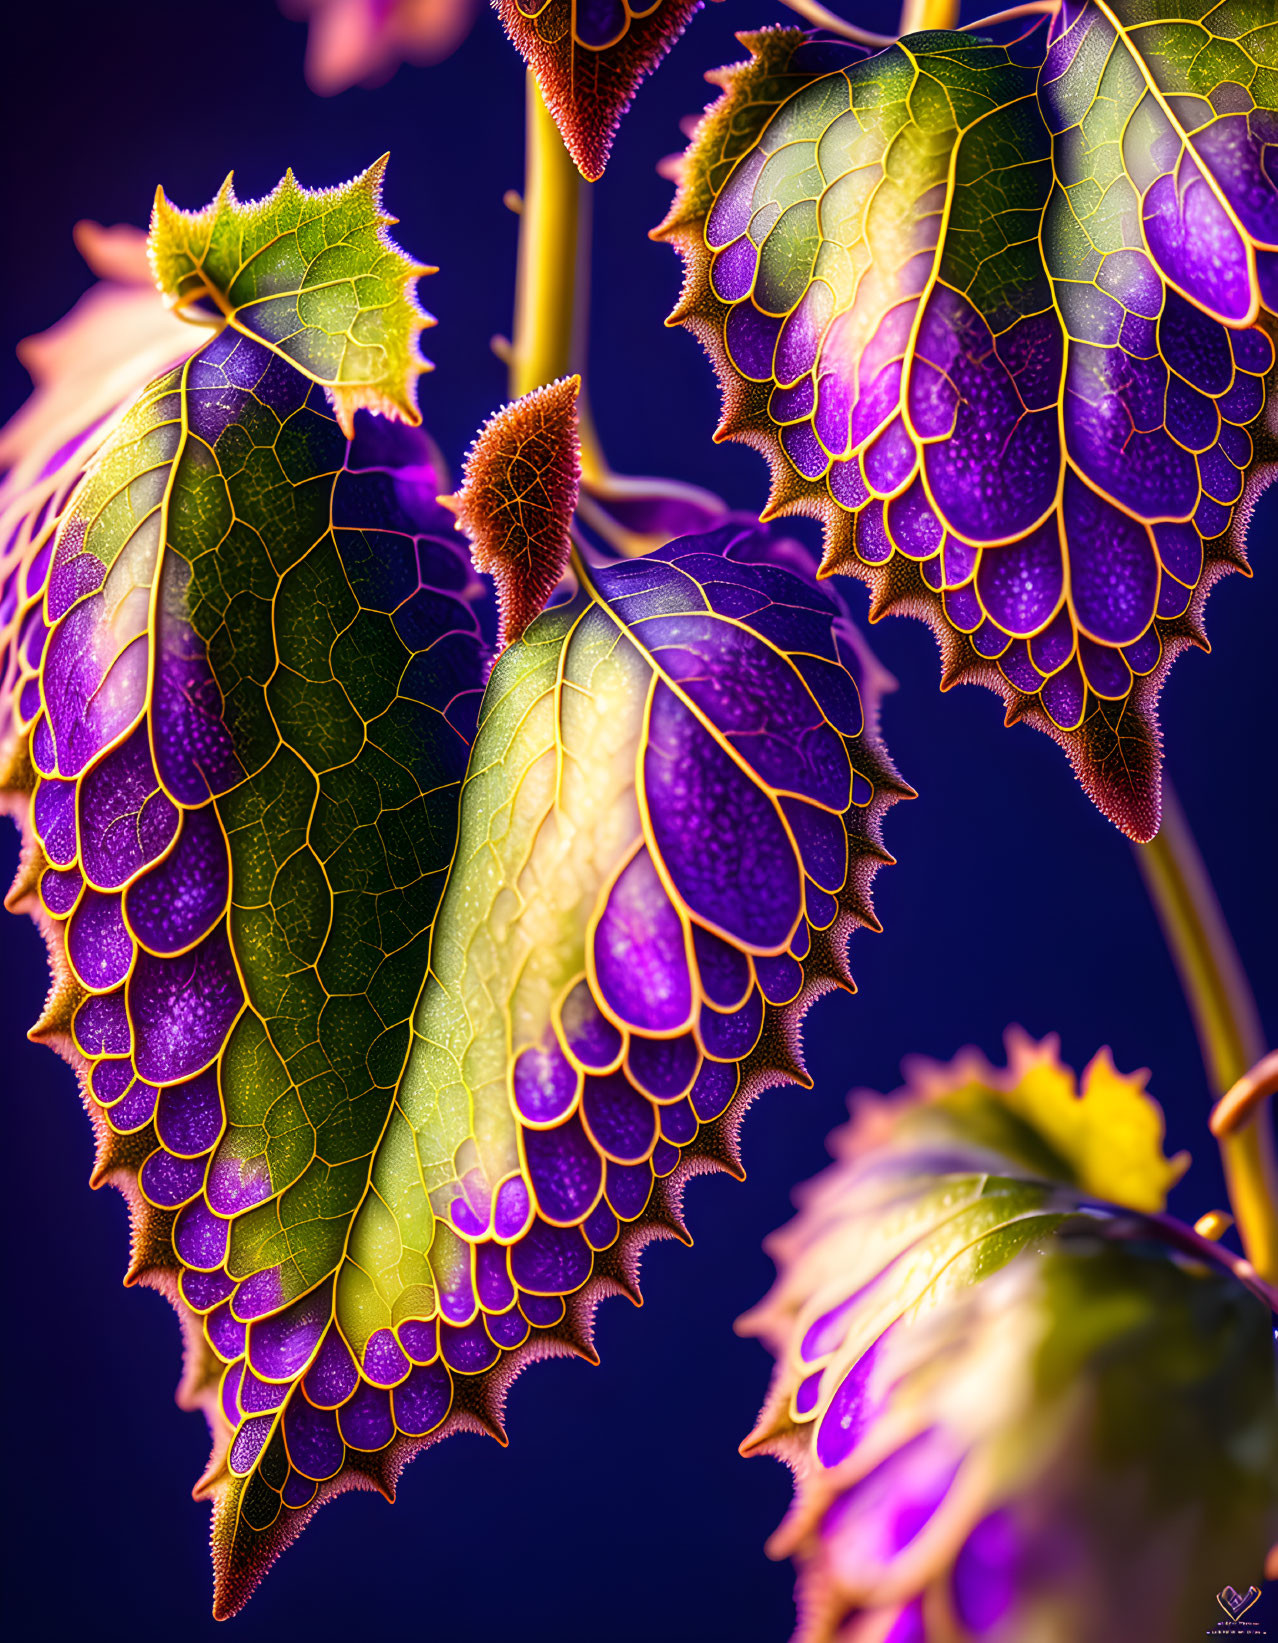 Detailed Close-up of Vibrant Purple Leaves with Vein Patterns and Dew Drops on Dark Background